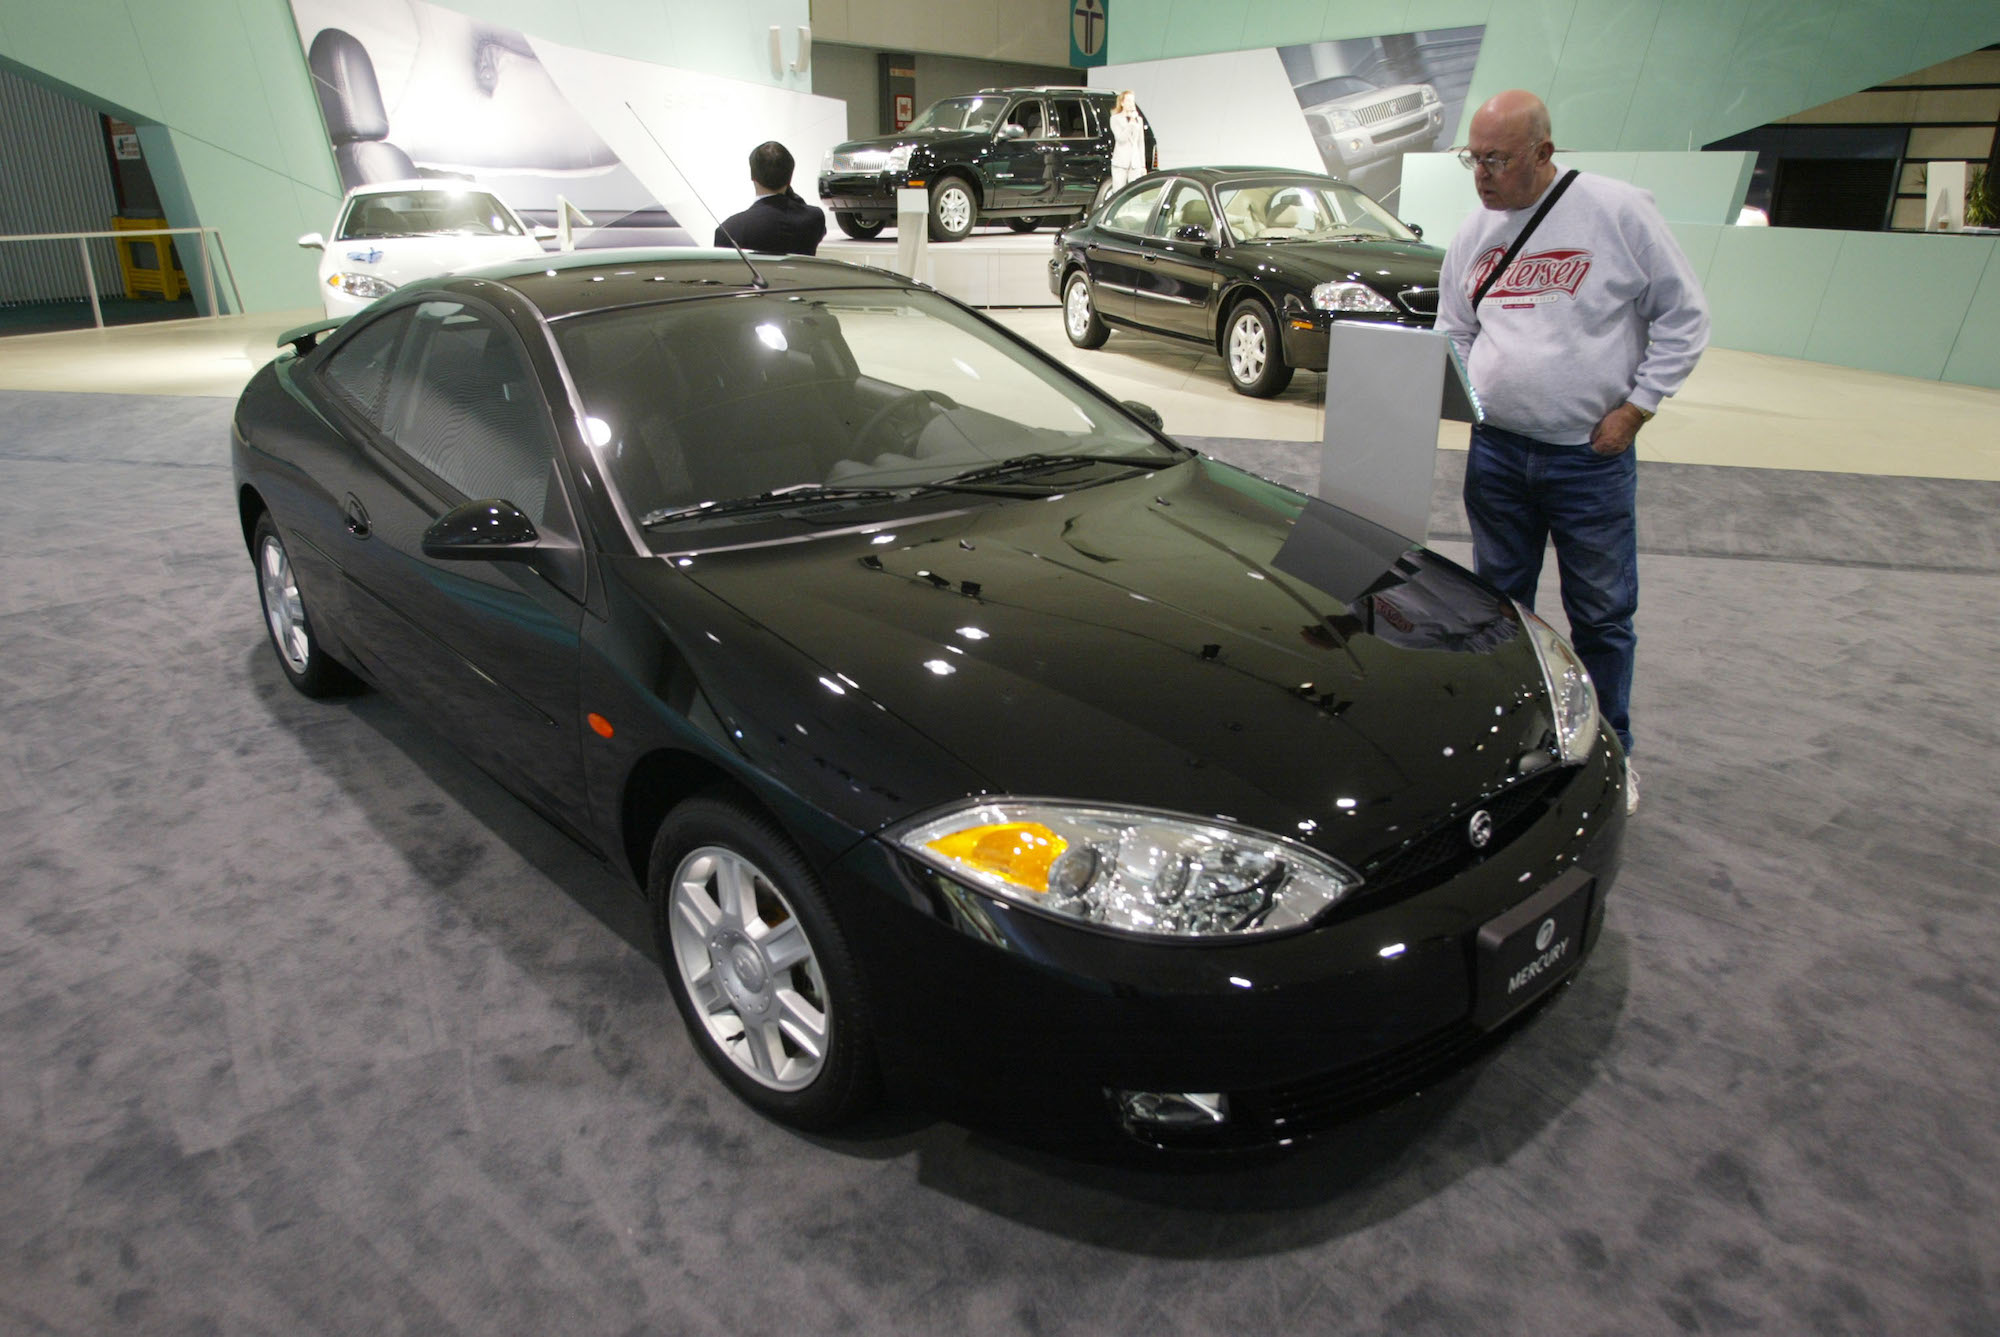 Harlan Curtis examines a black Mercury Cougar coupe at the Los Angeles Auto Show on January 11, 2001, in Los Angeles